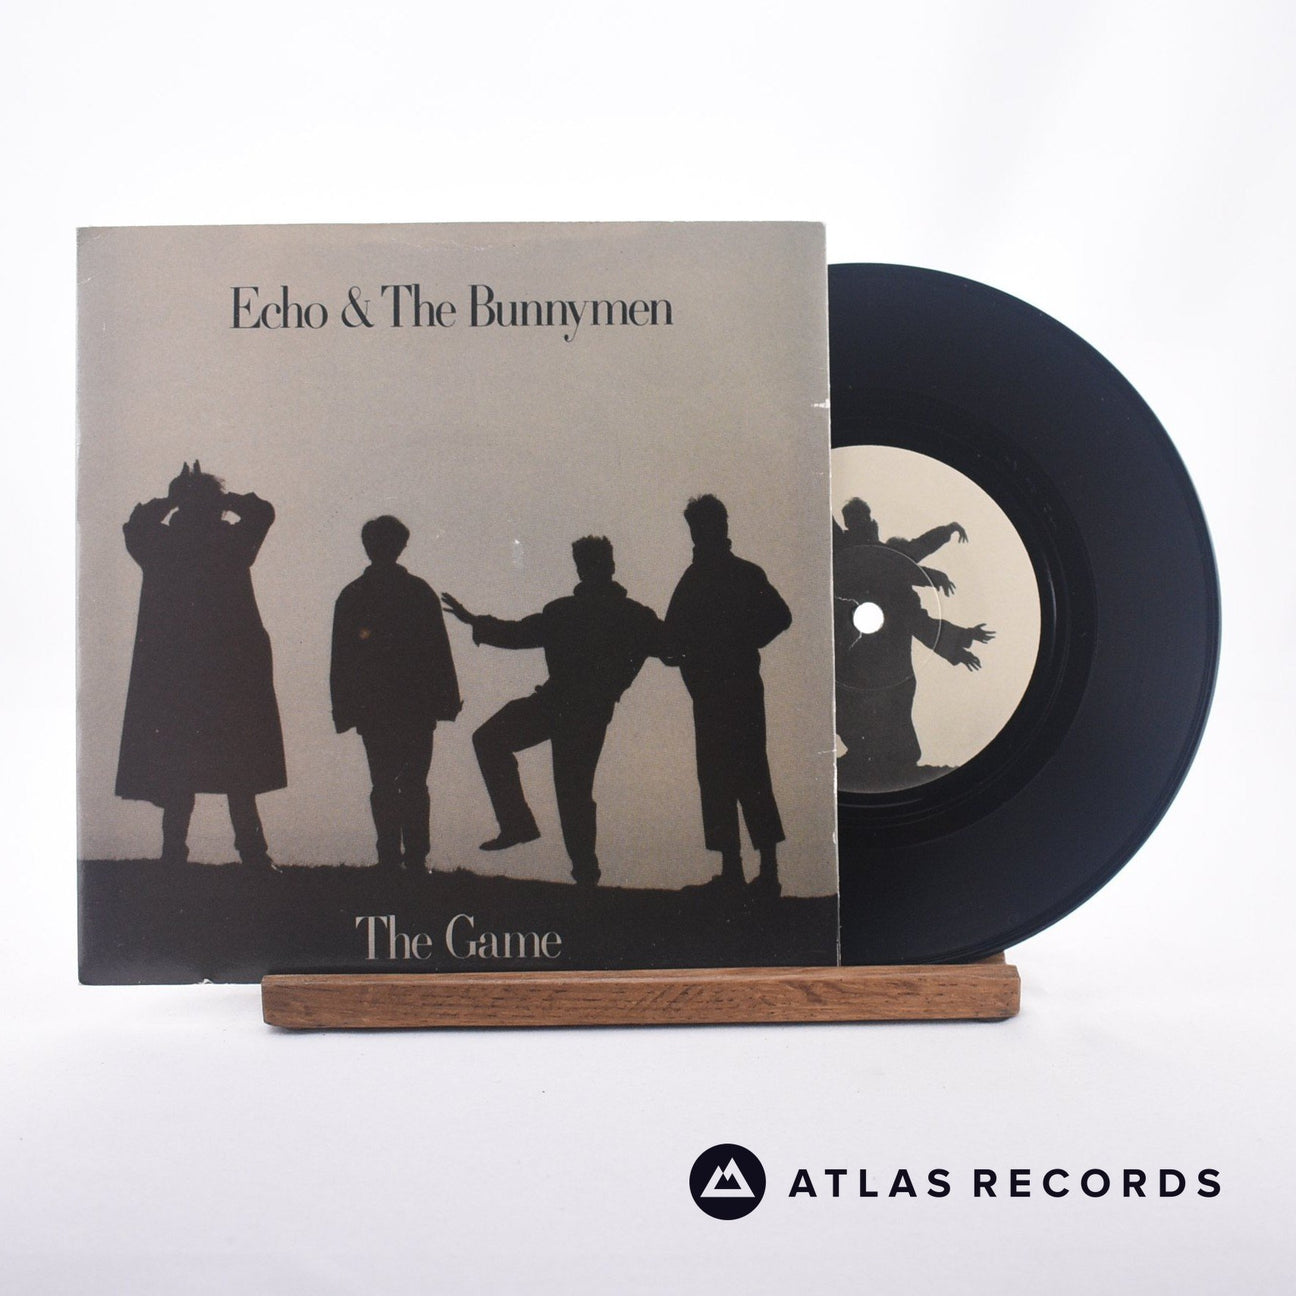 Echo & The Bunnymen The Game 7" Vinyl Record - Front Cover & Record